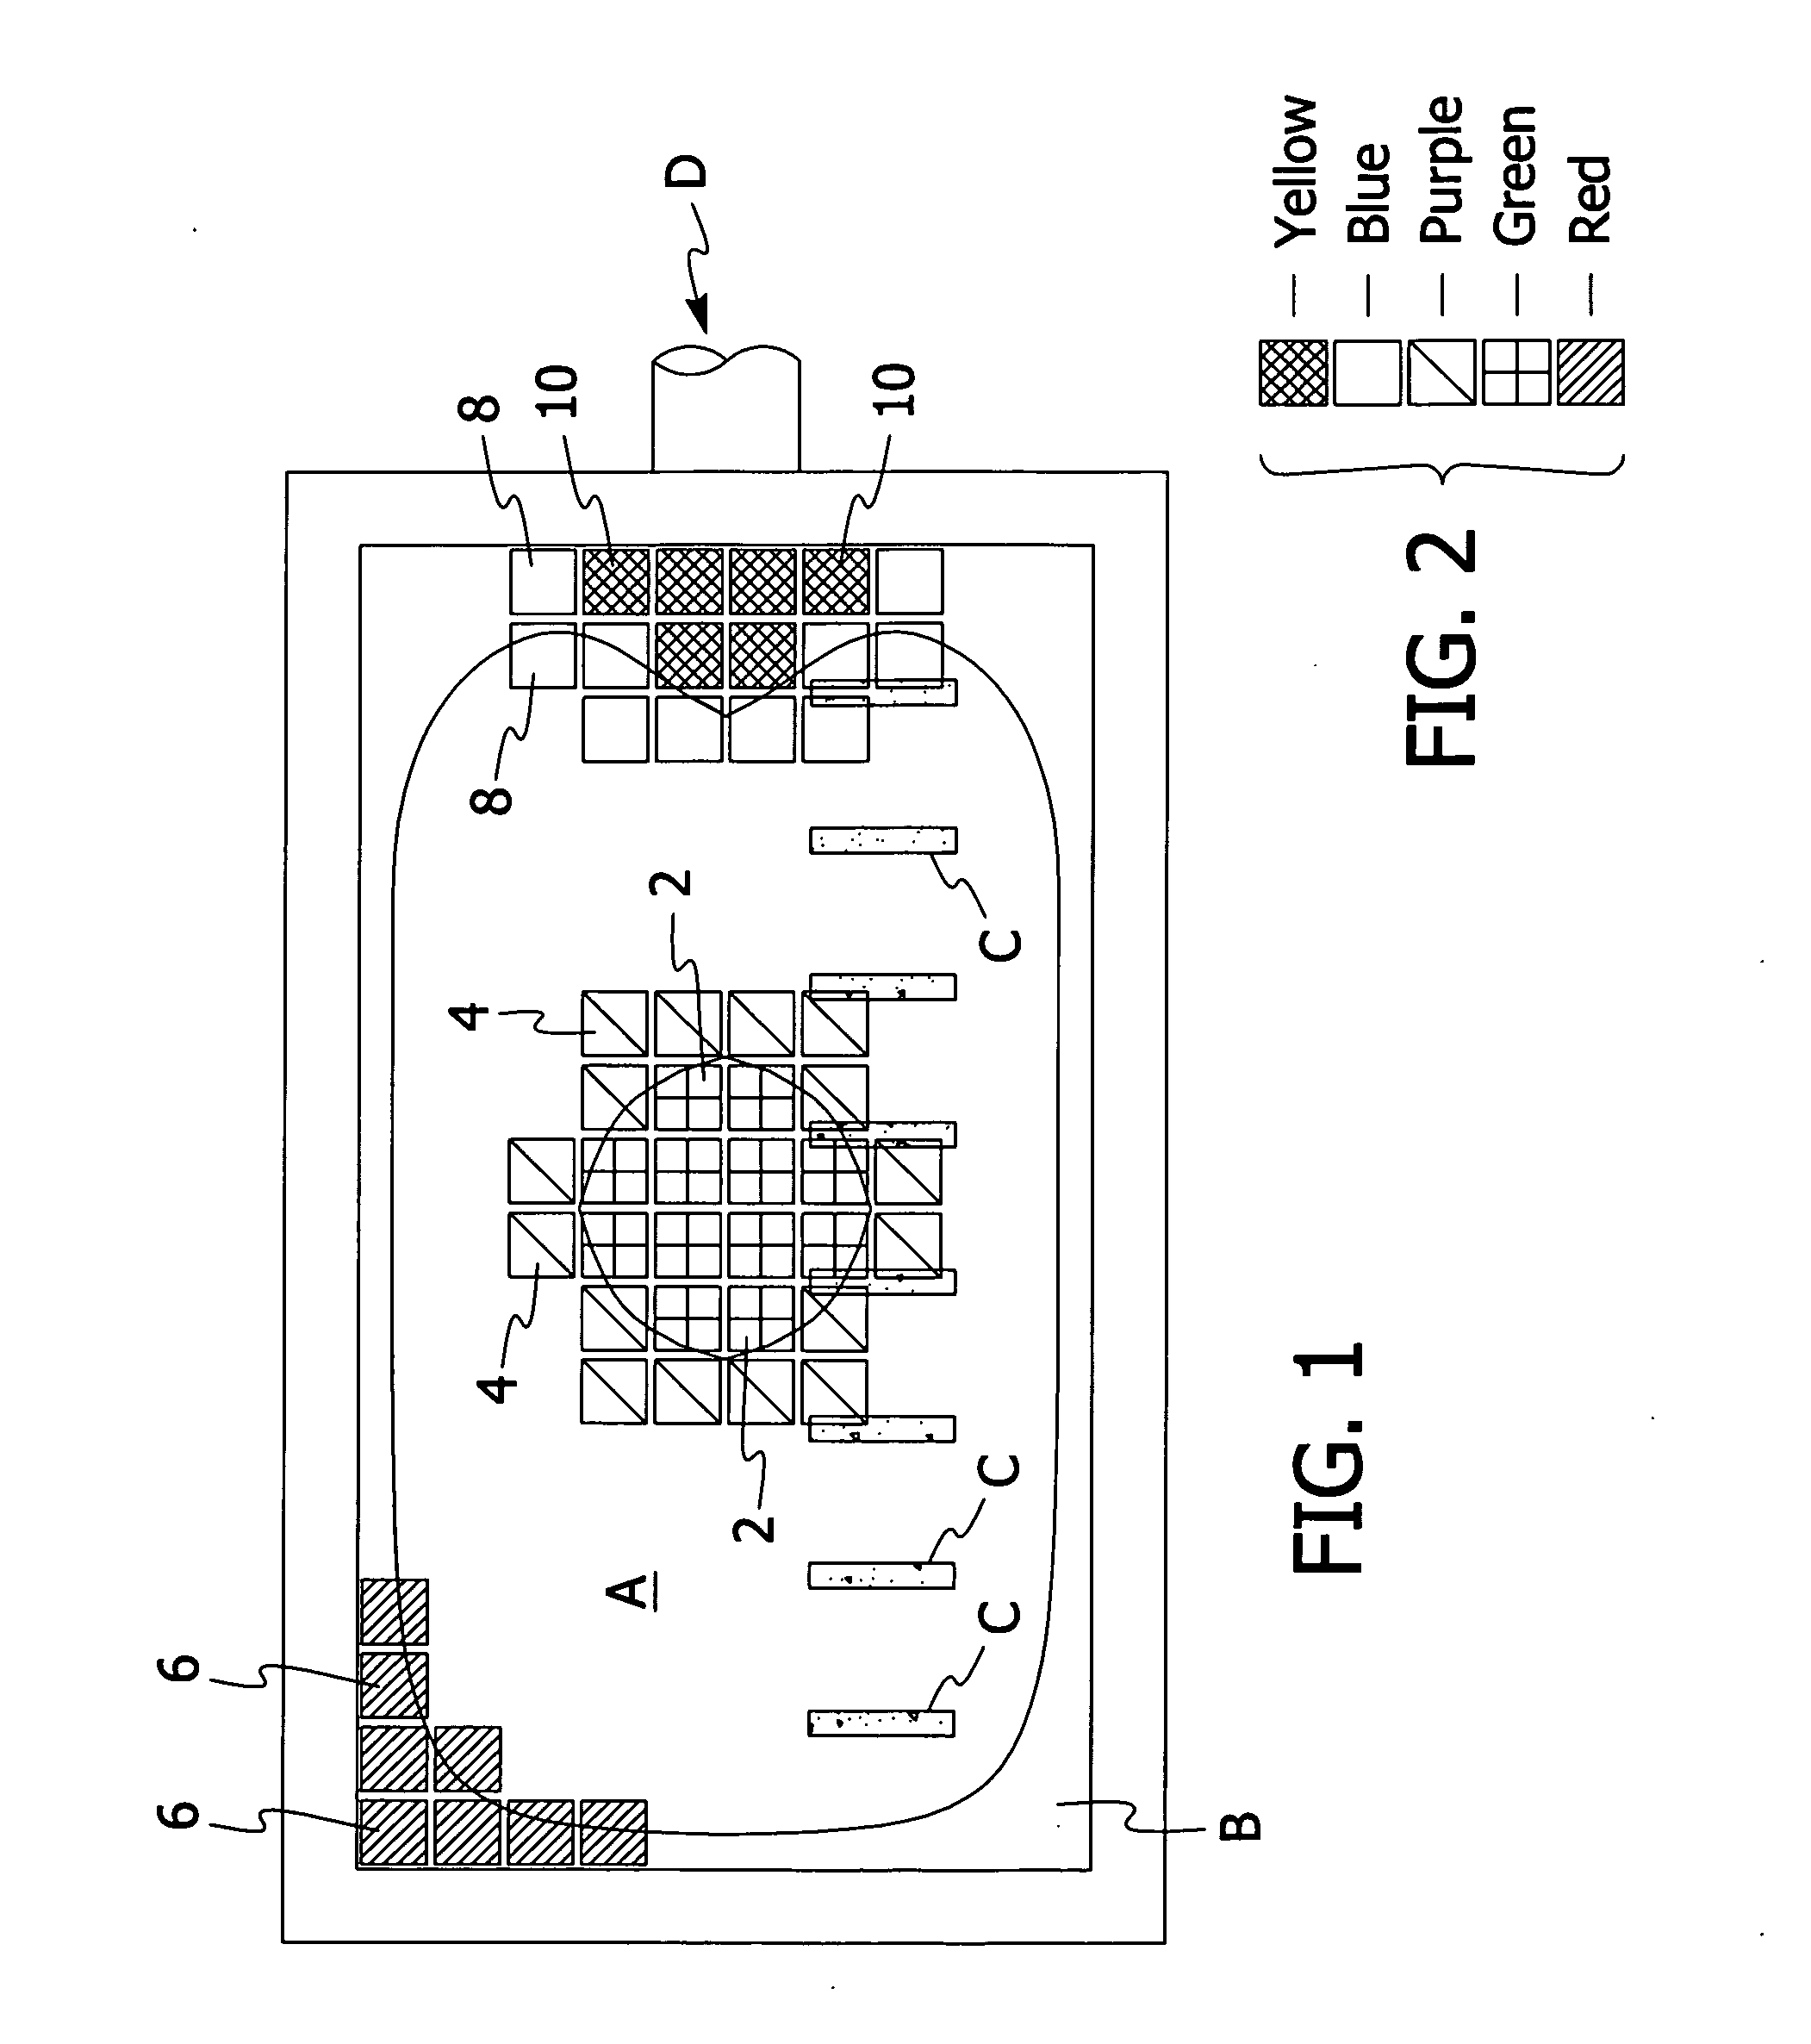 System and method for uniformly distributing a fluid through a filter bed in a filter